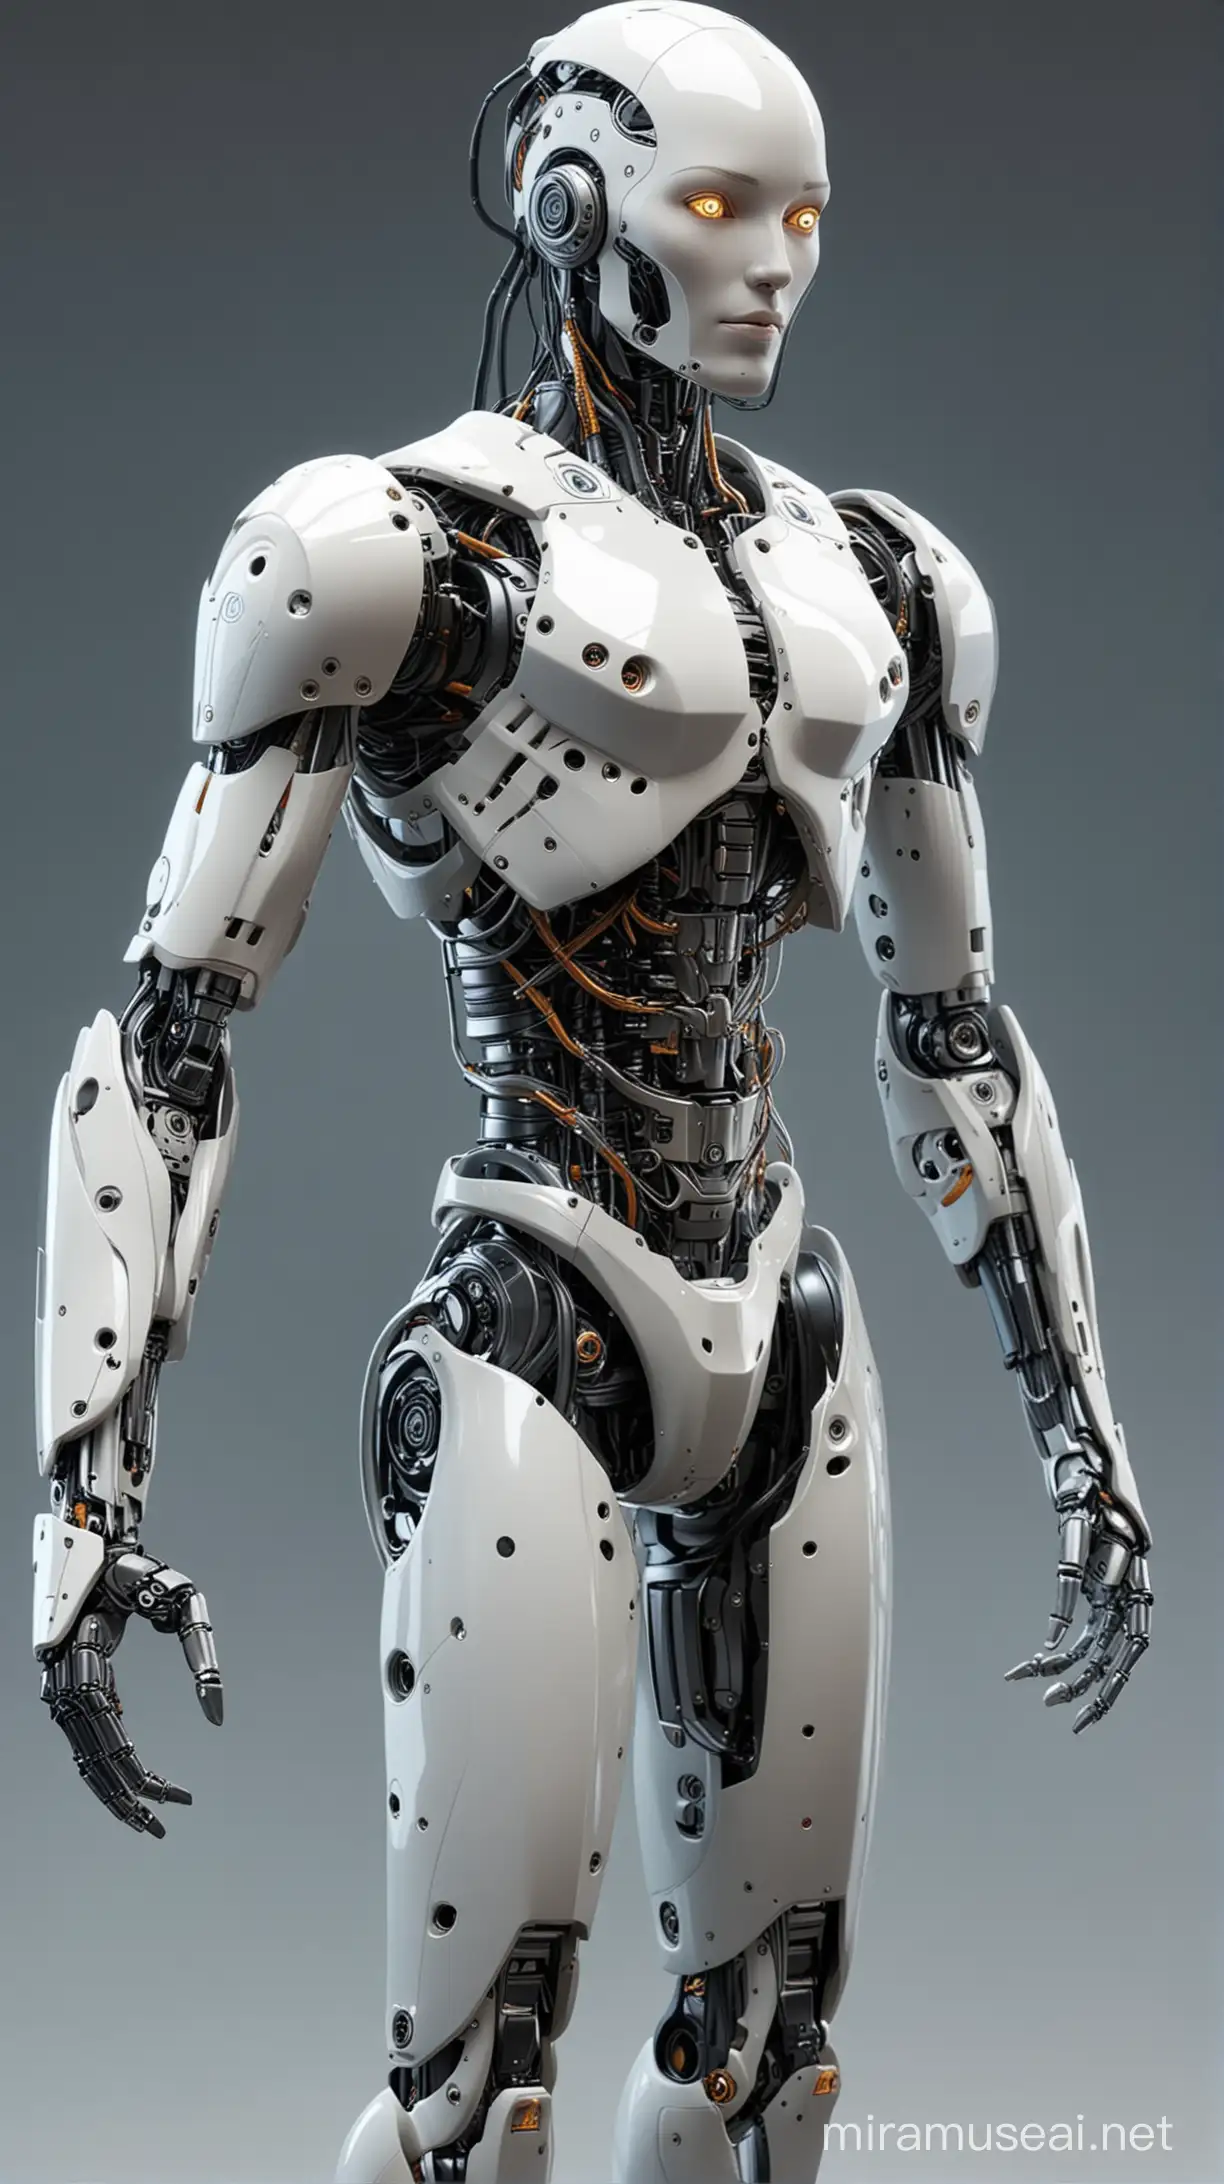 Design a robot that resembles a human but incorporates all the details of its robotic nature.